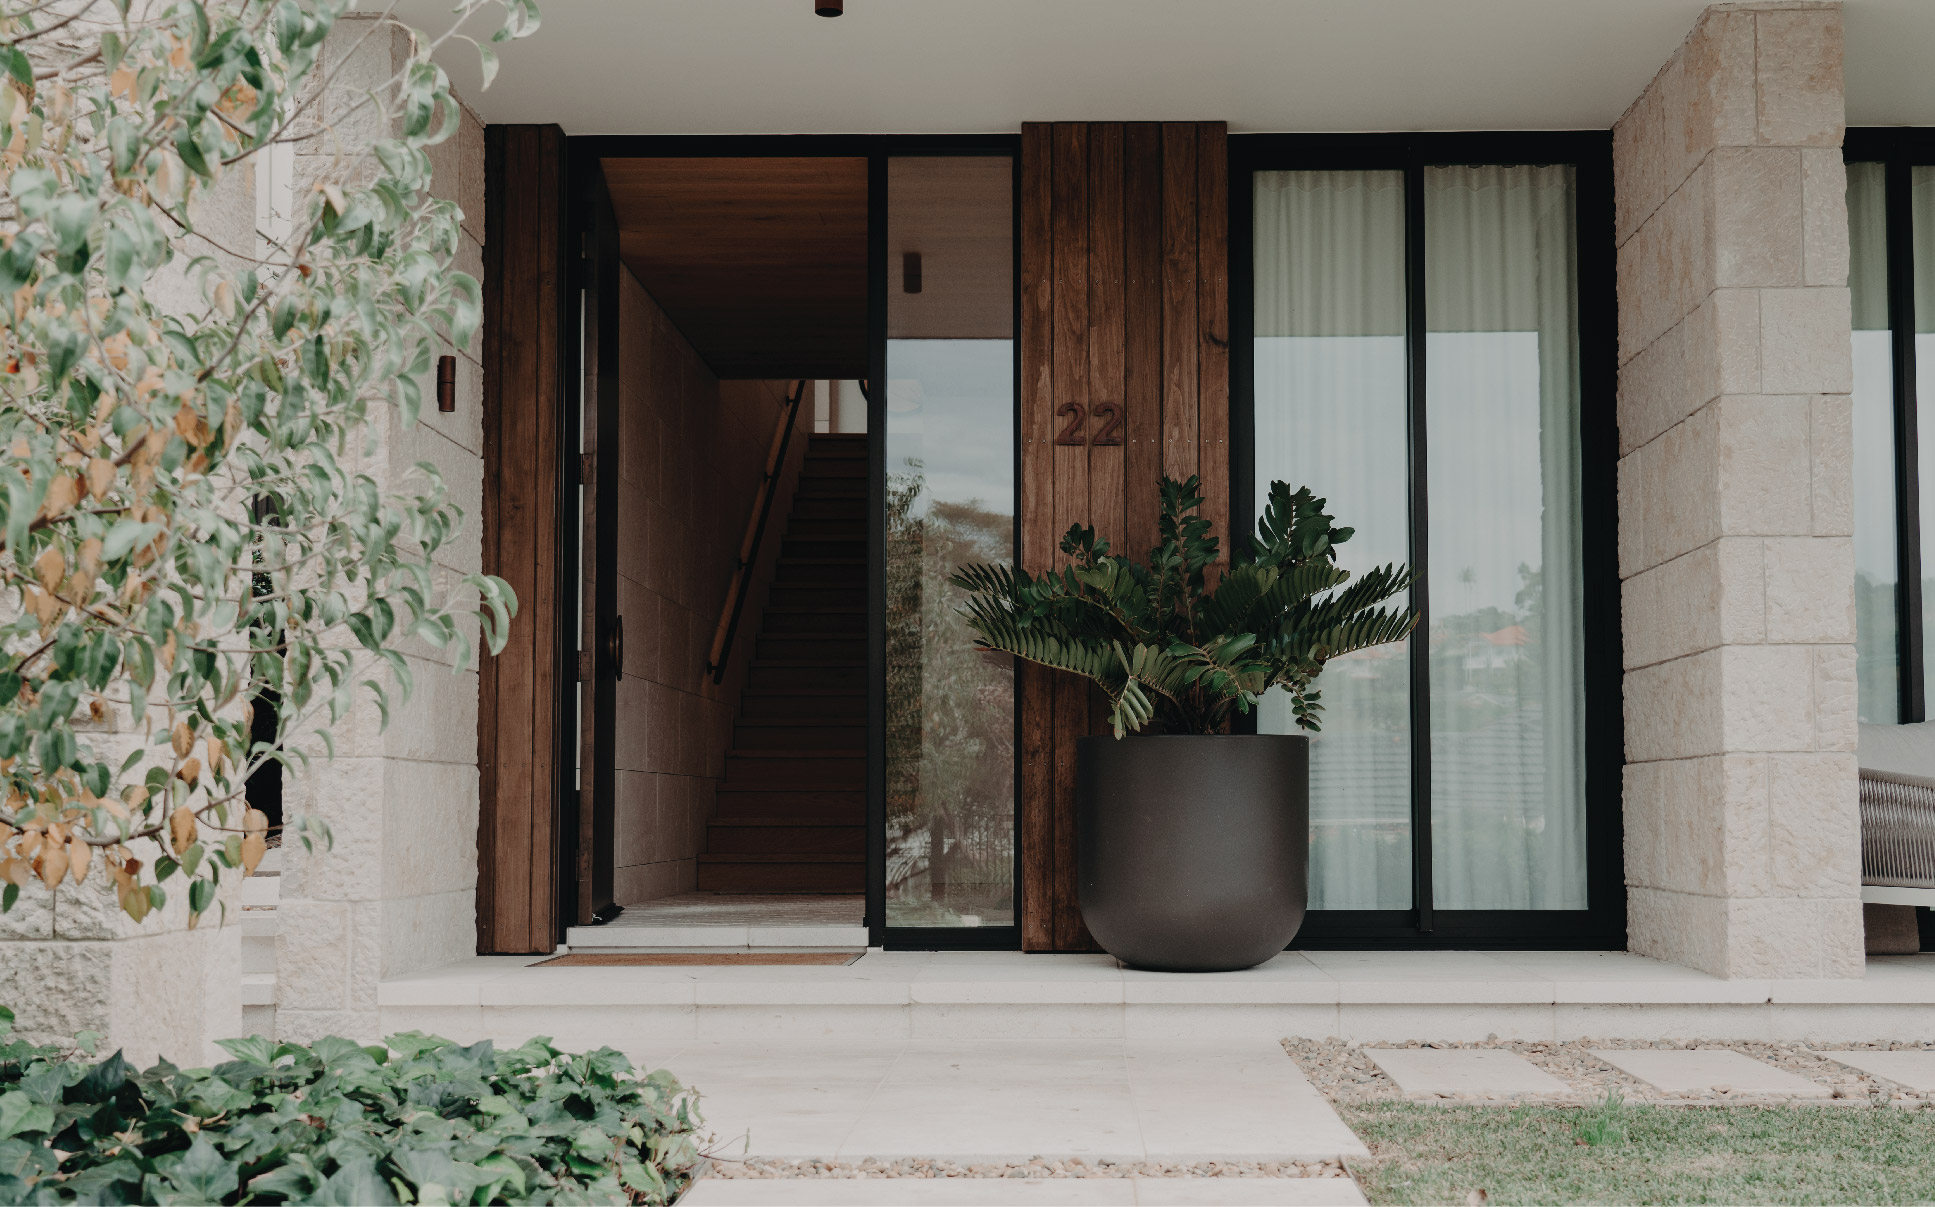 7 Tips for Preparing Your Property’s Entrance for a Sale